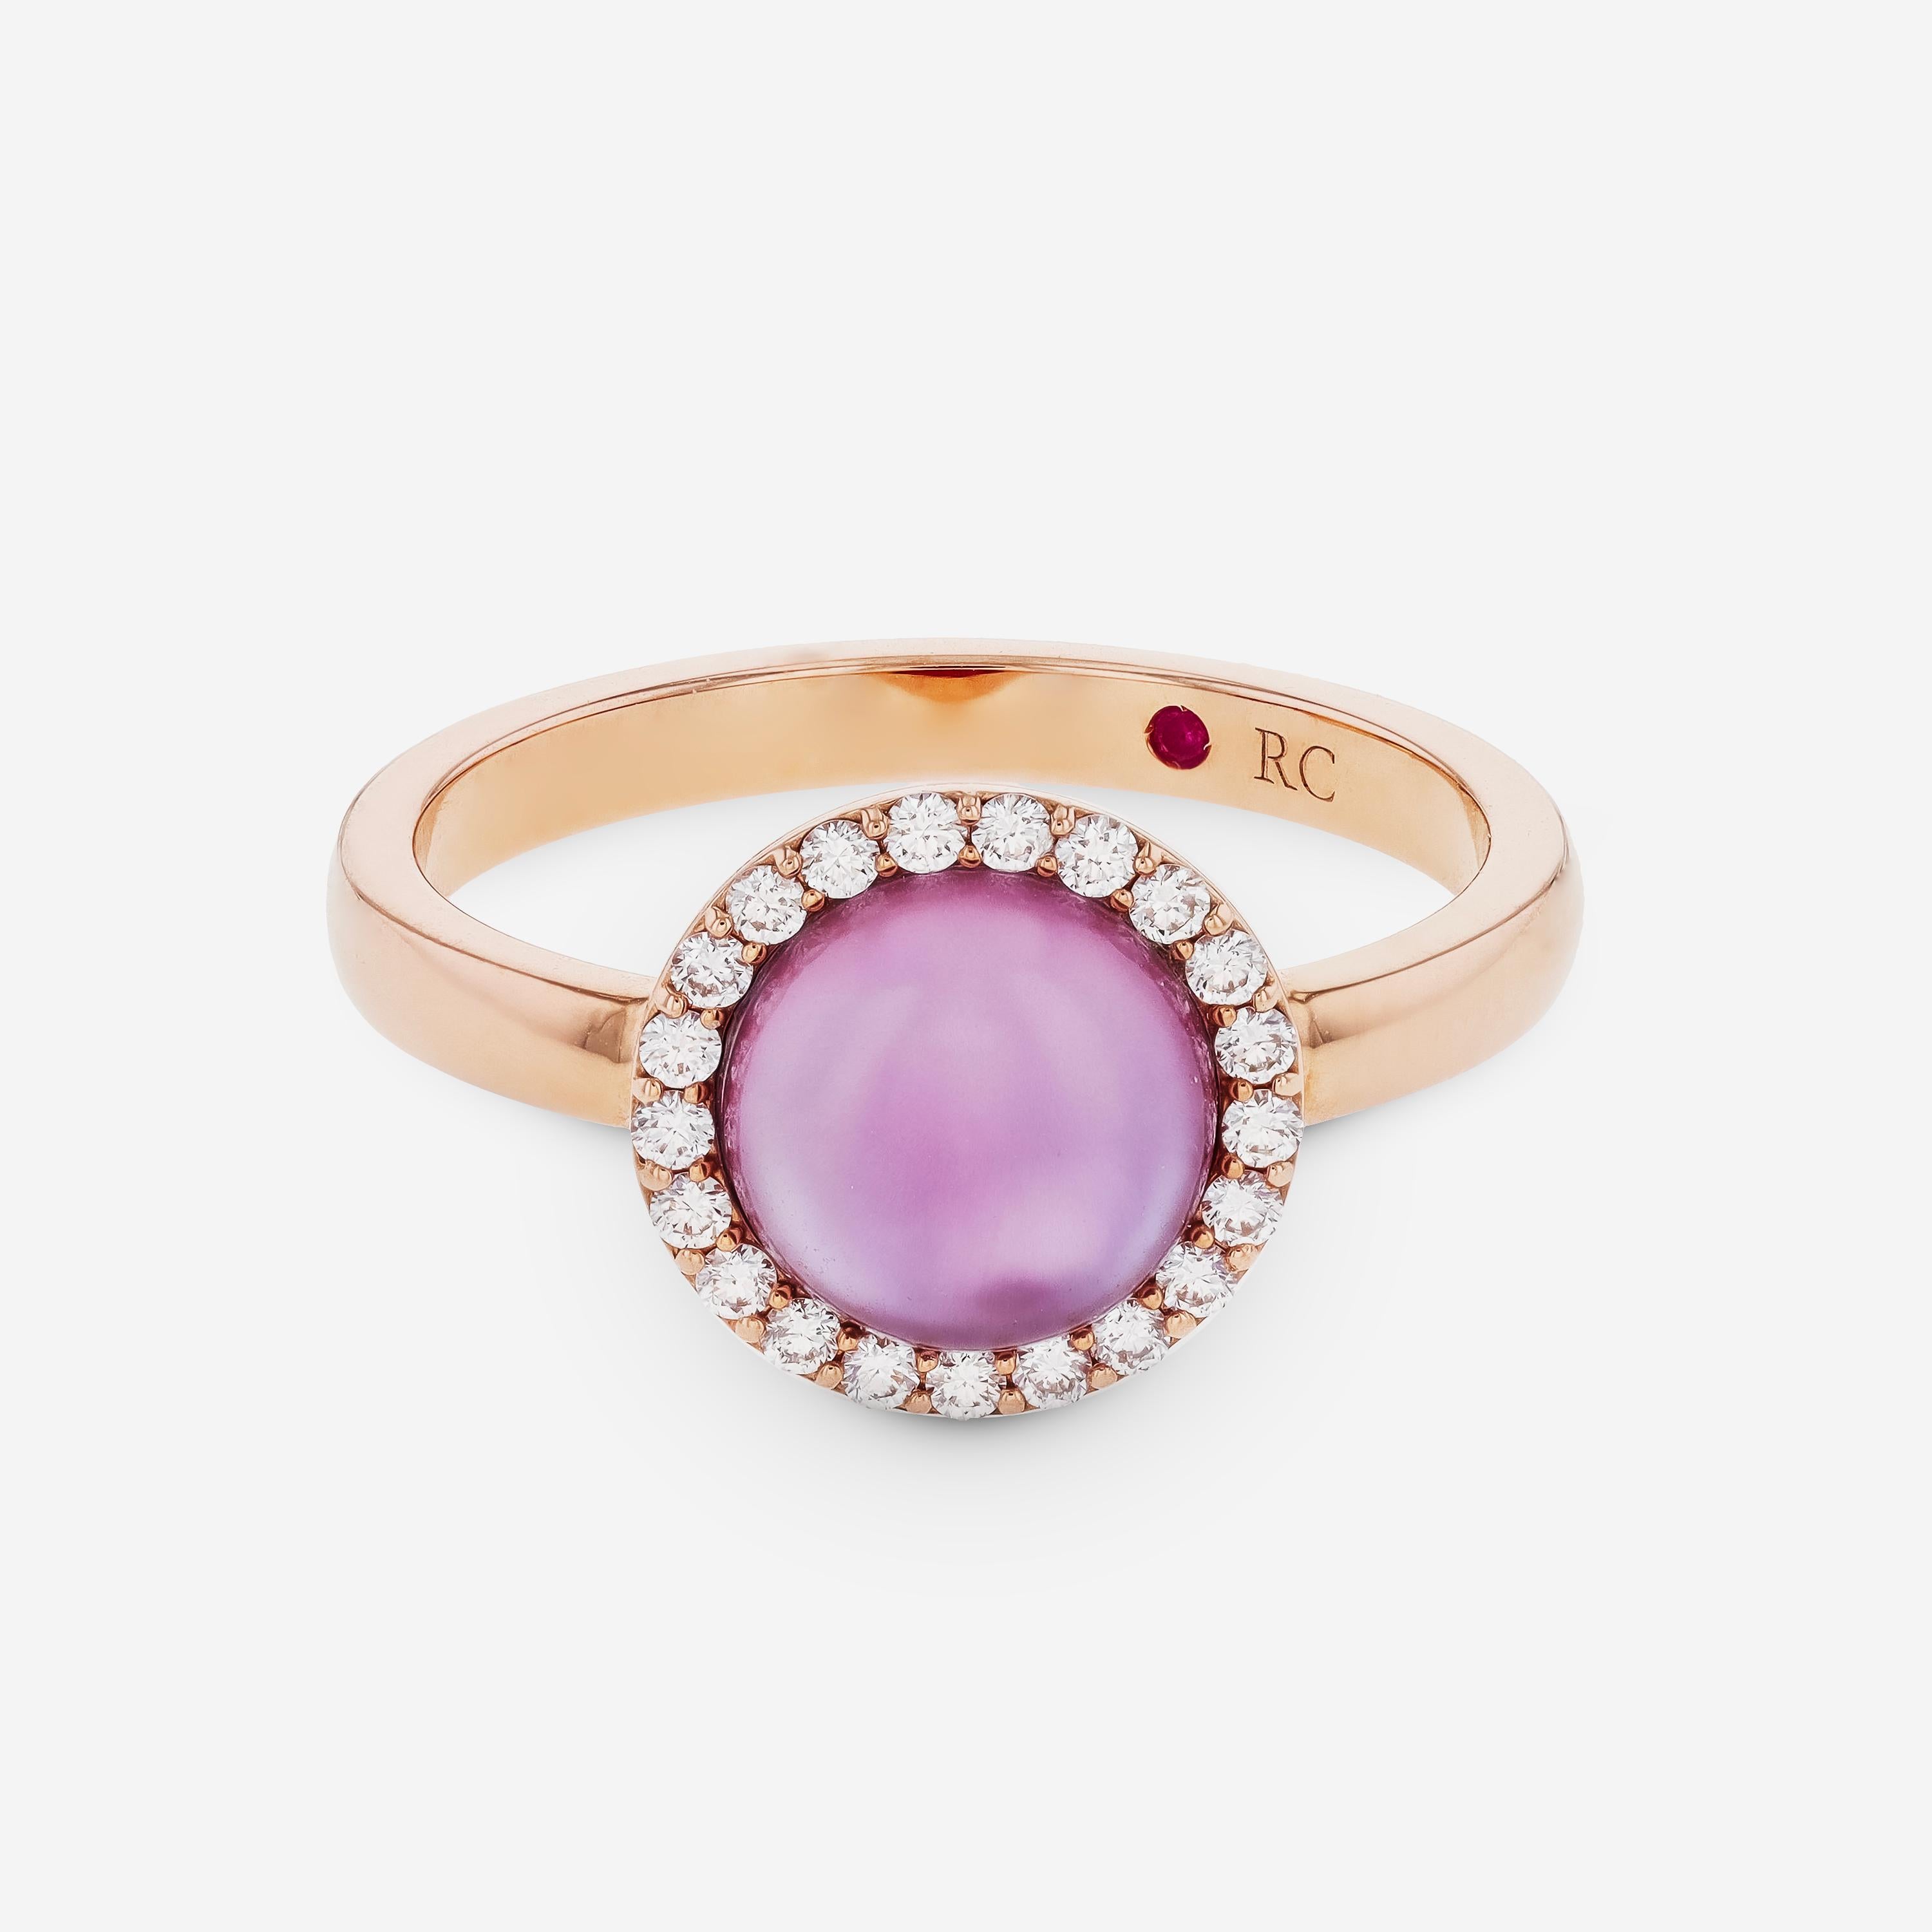 Contemporary Roberto Coin 18K Rose Gold, Amethyst and Diamond Halo Ring sz 6.5 For Sale